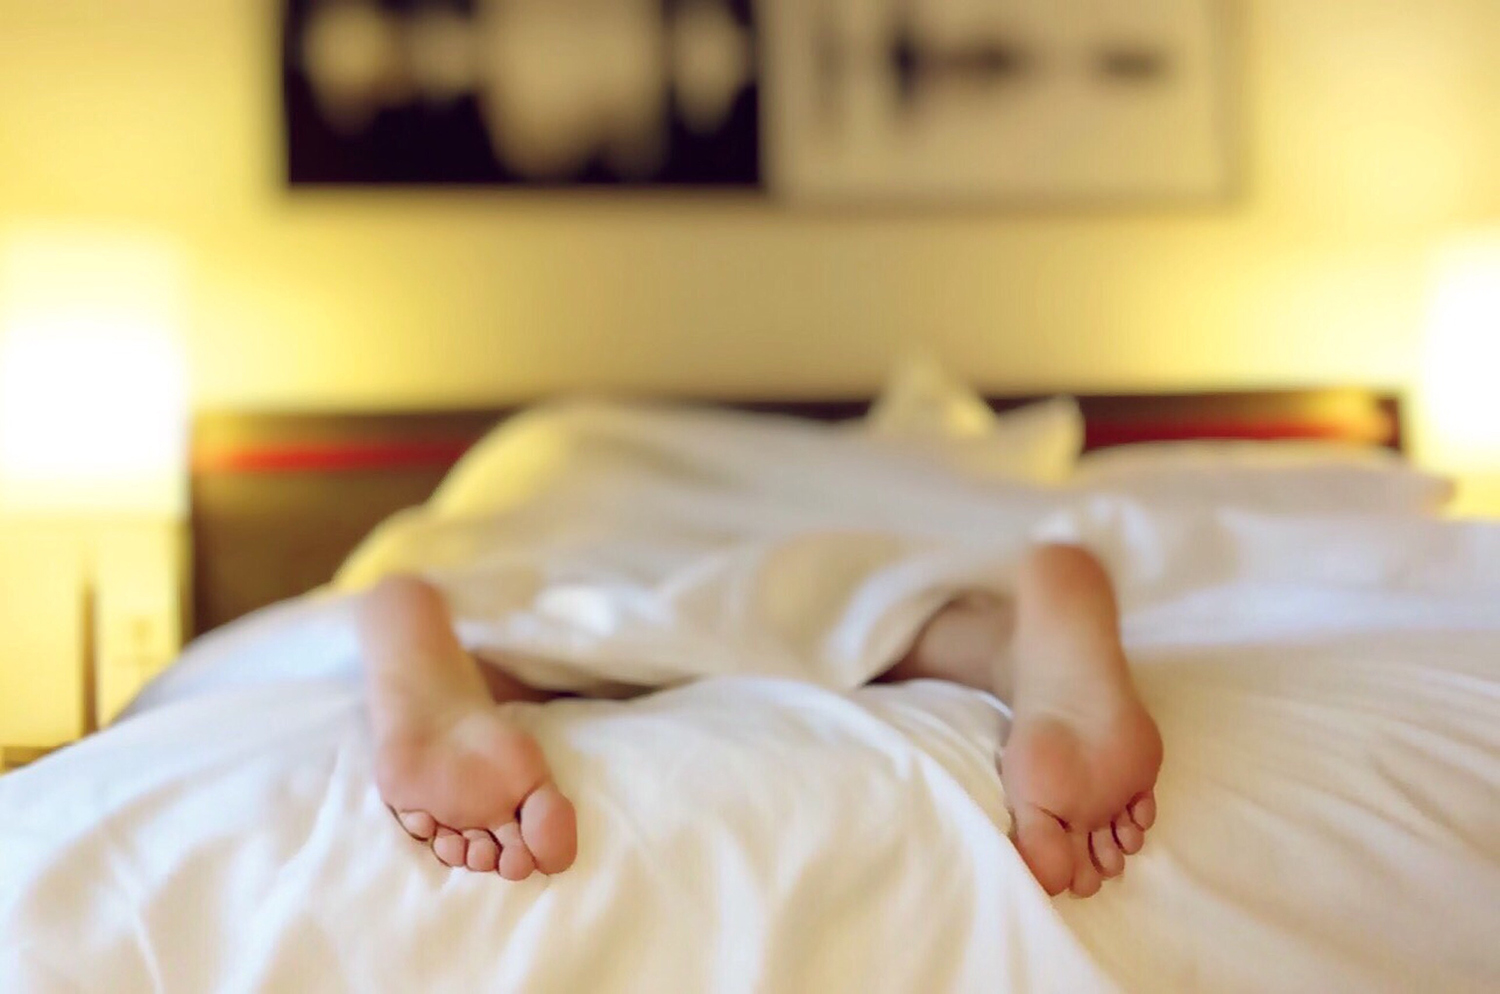 Image of feet in bed.